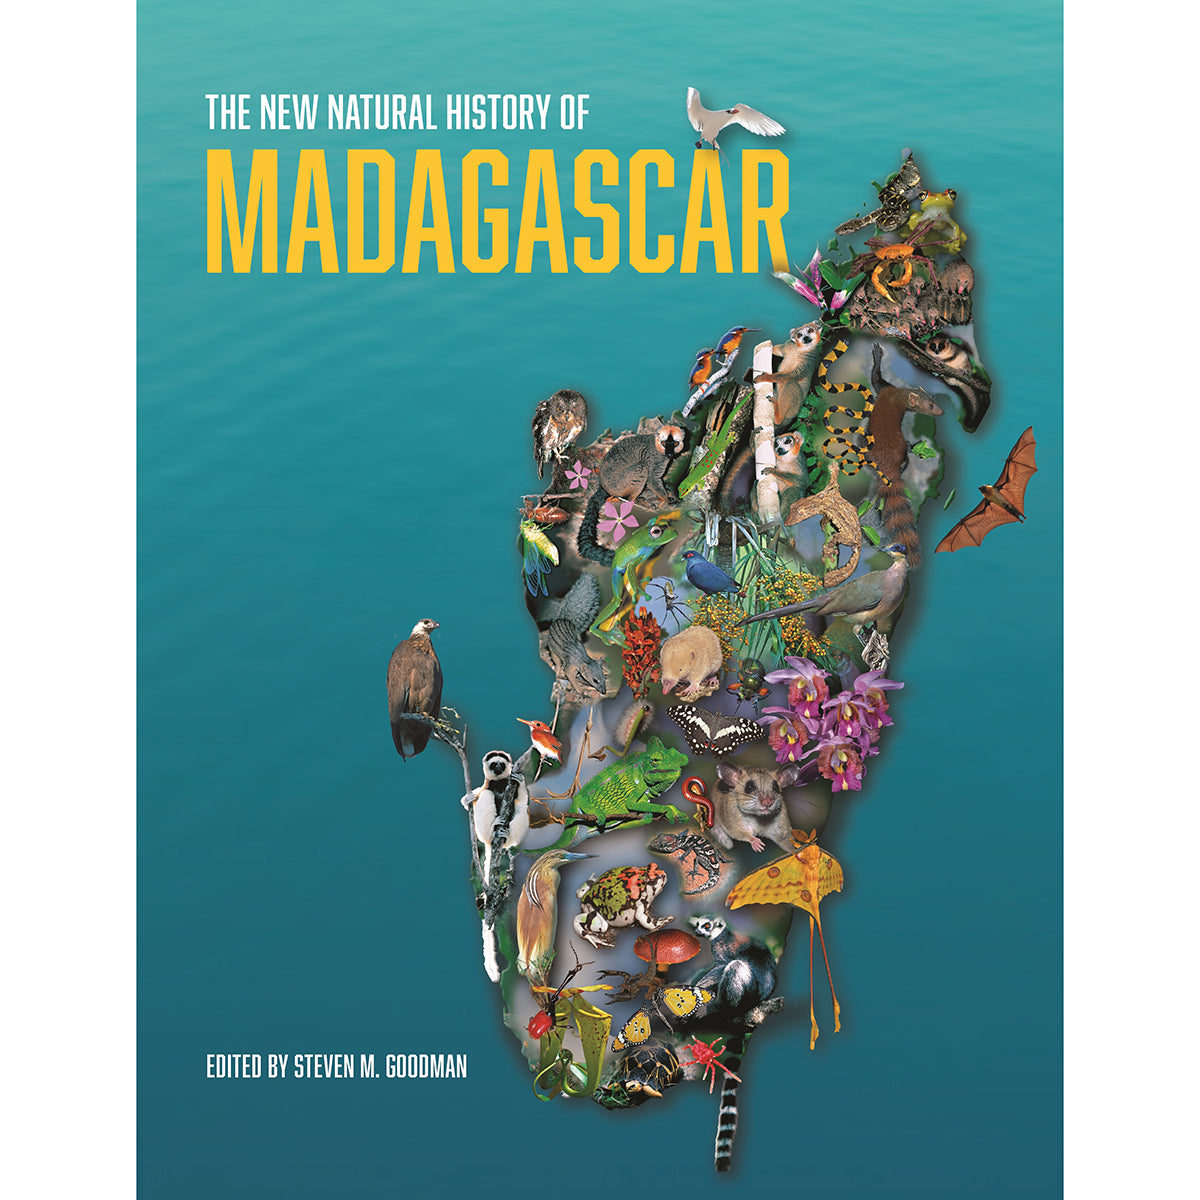 Science Action: Madagascar - Field Museum